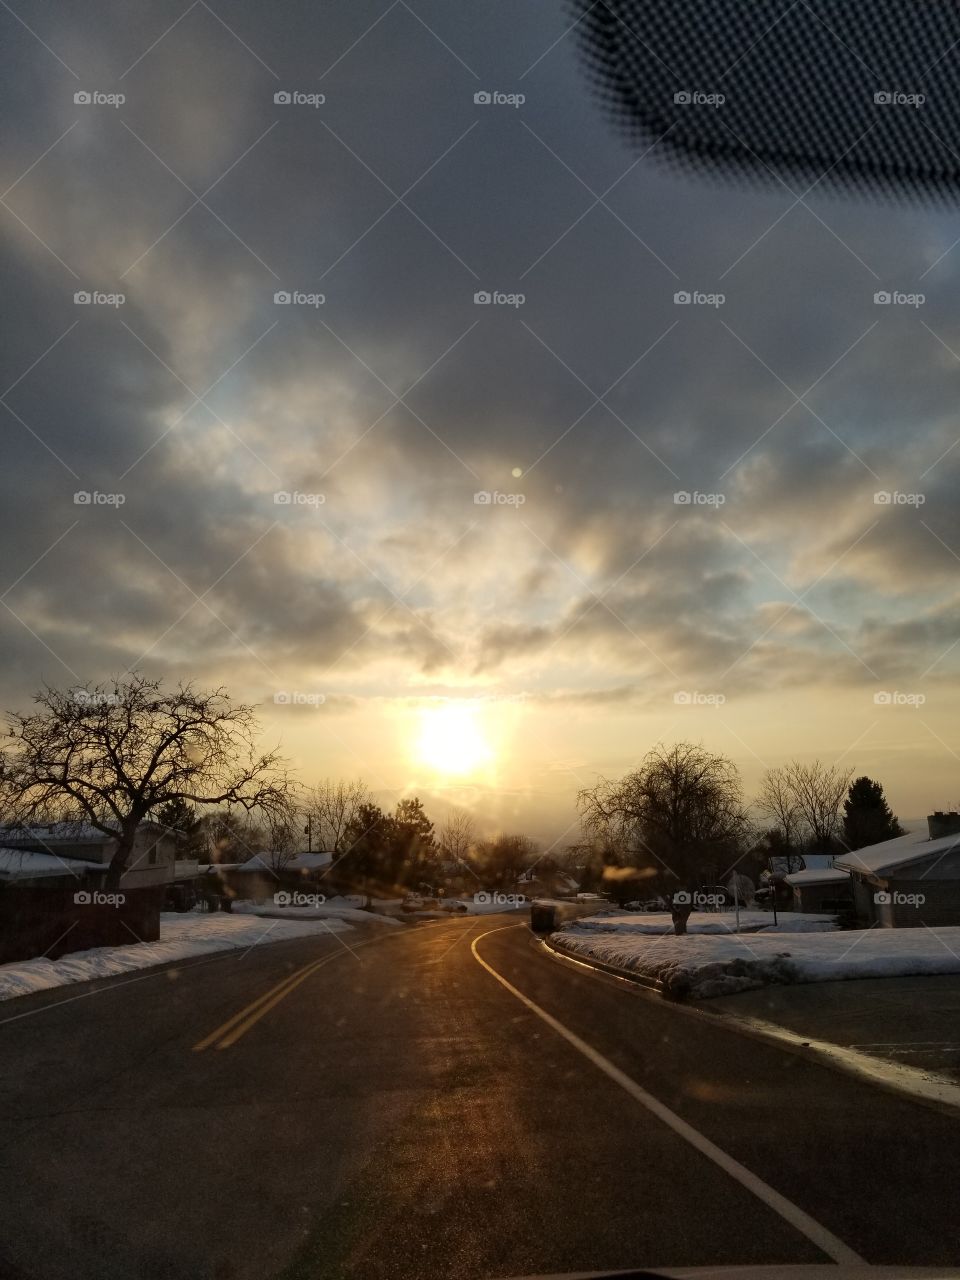 Here is one of my favorite sunset photos from my gallery. As the sun sets and falls behind the mountains of the west it leaves a mark of beauty for an eye to see here we have the clouds, the road, houses, trees and the sun. there is beauty all around